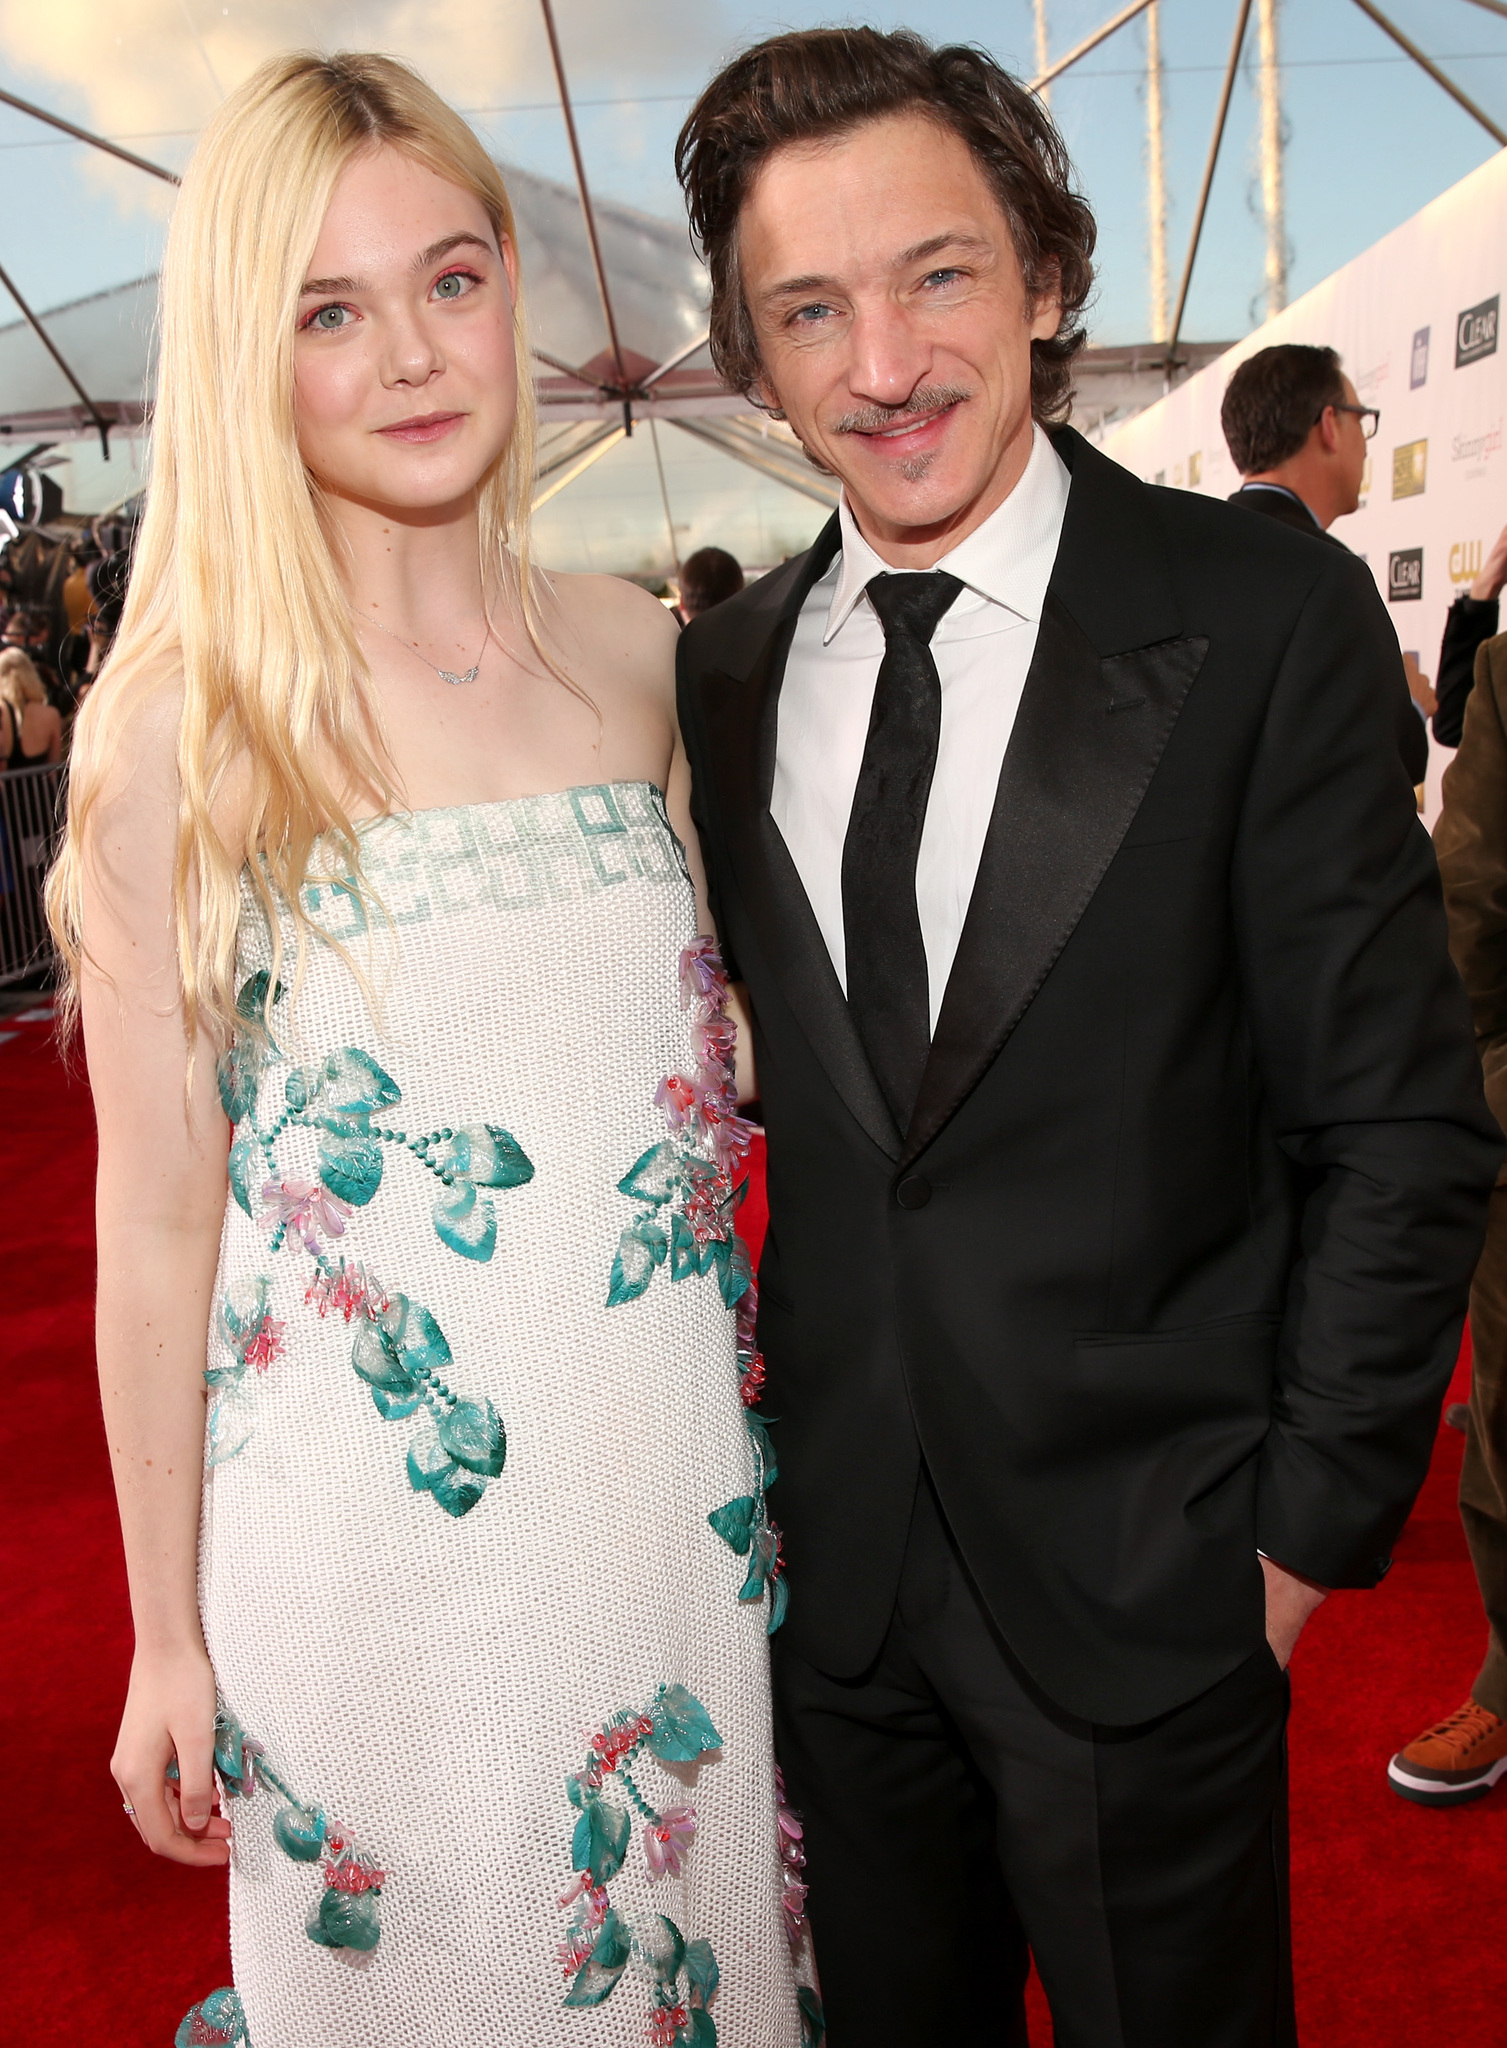 John Hawkes and Elle Fanning